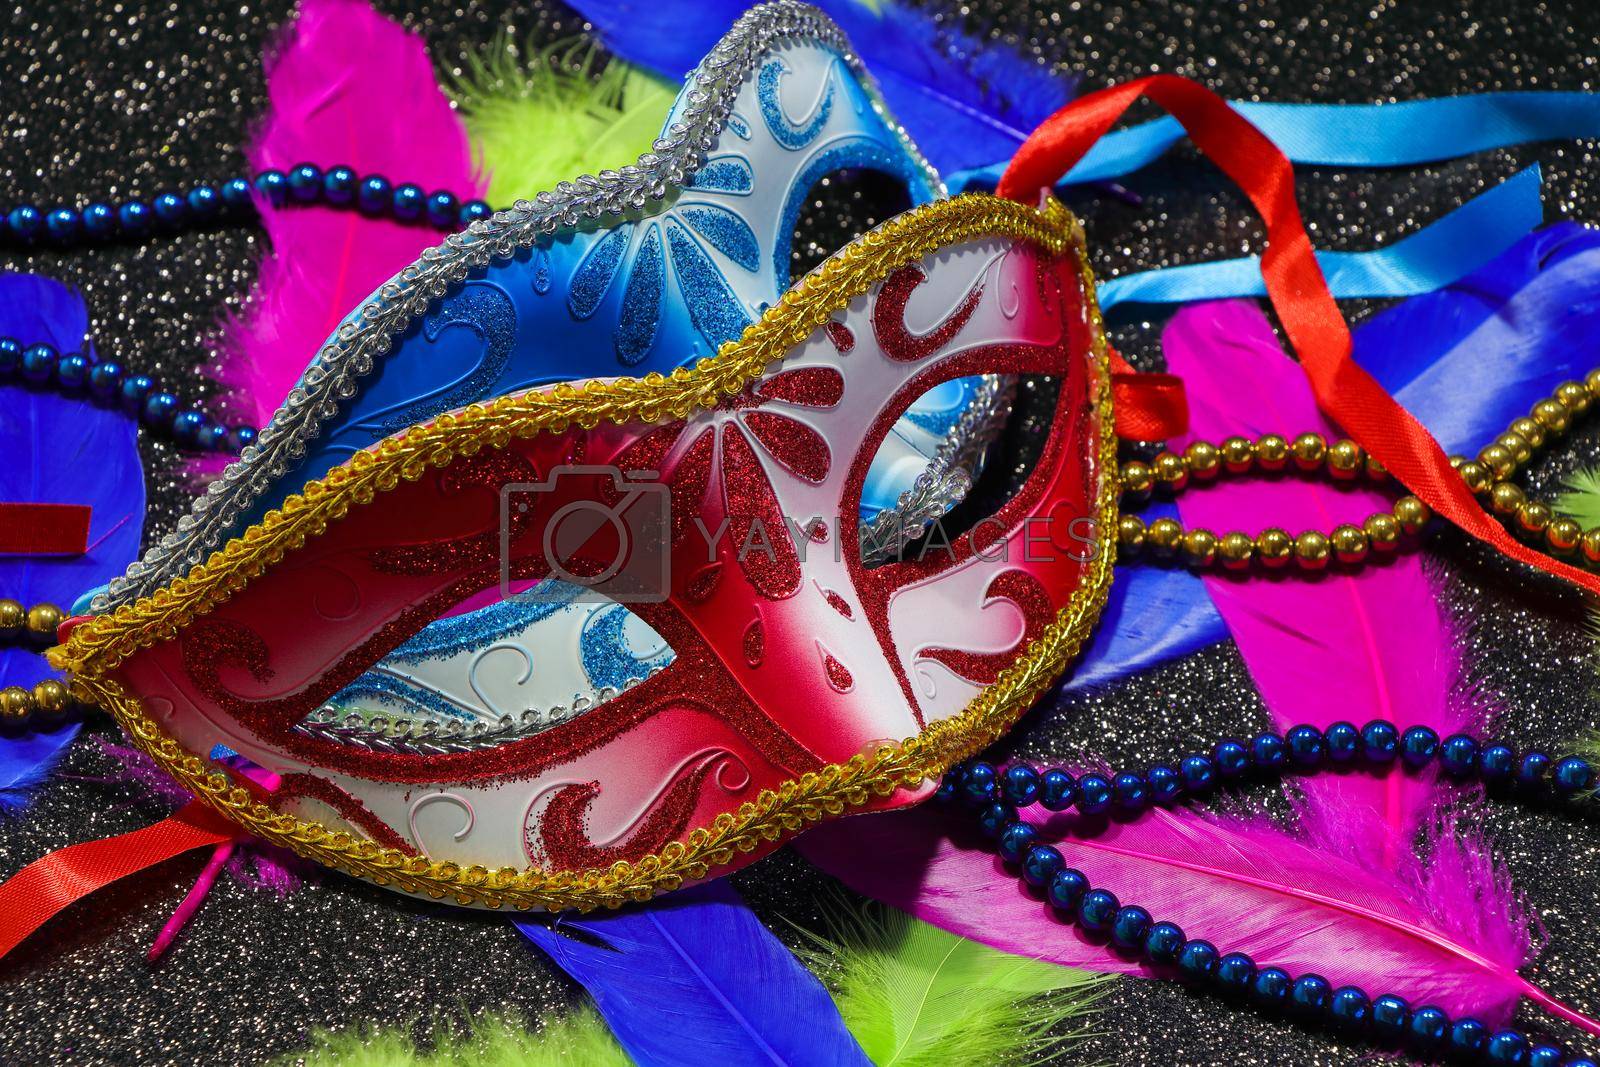 Royalty free image of Pair Of Face Masks With Feathers And Beads by jjvanginkel